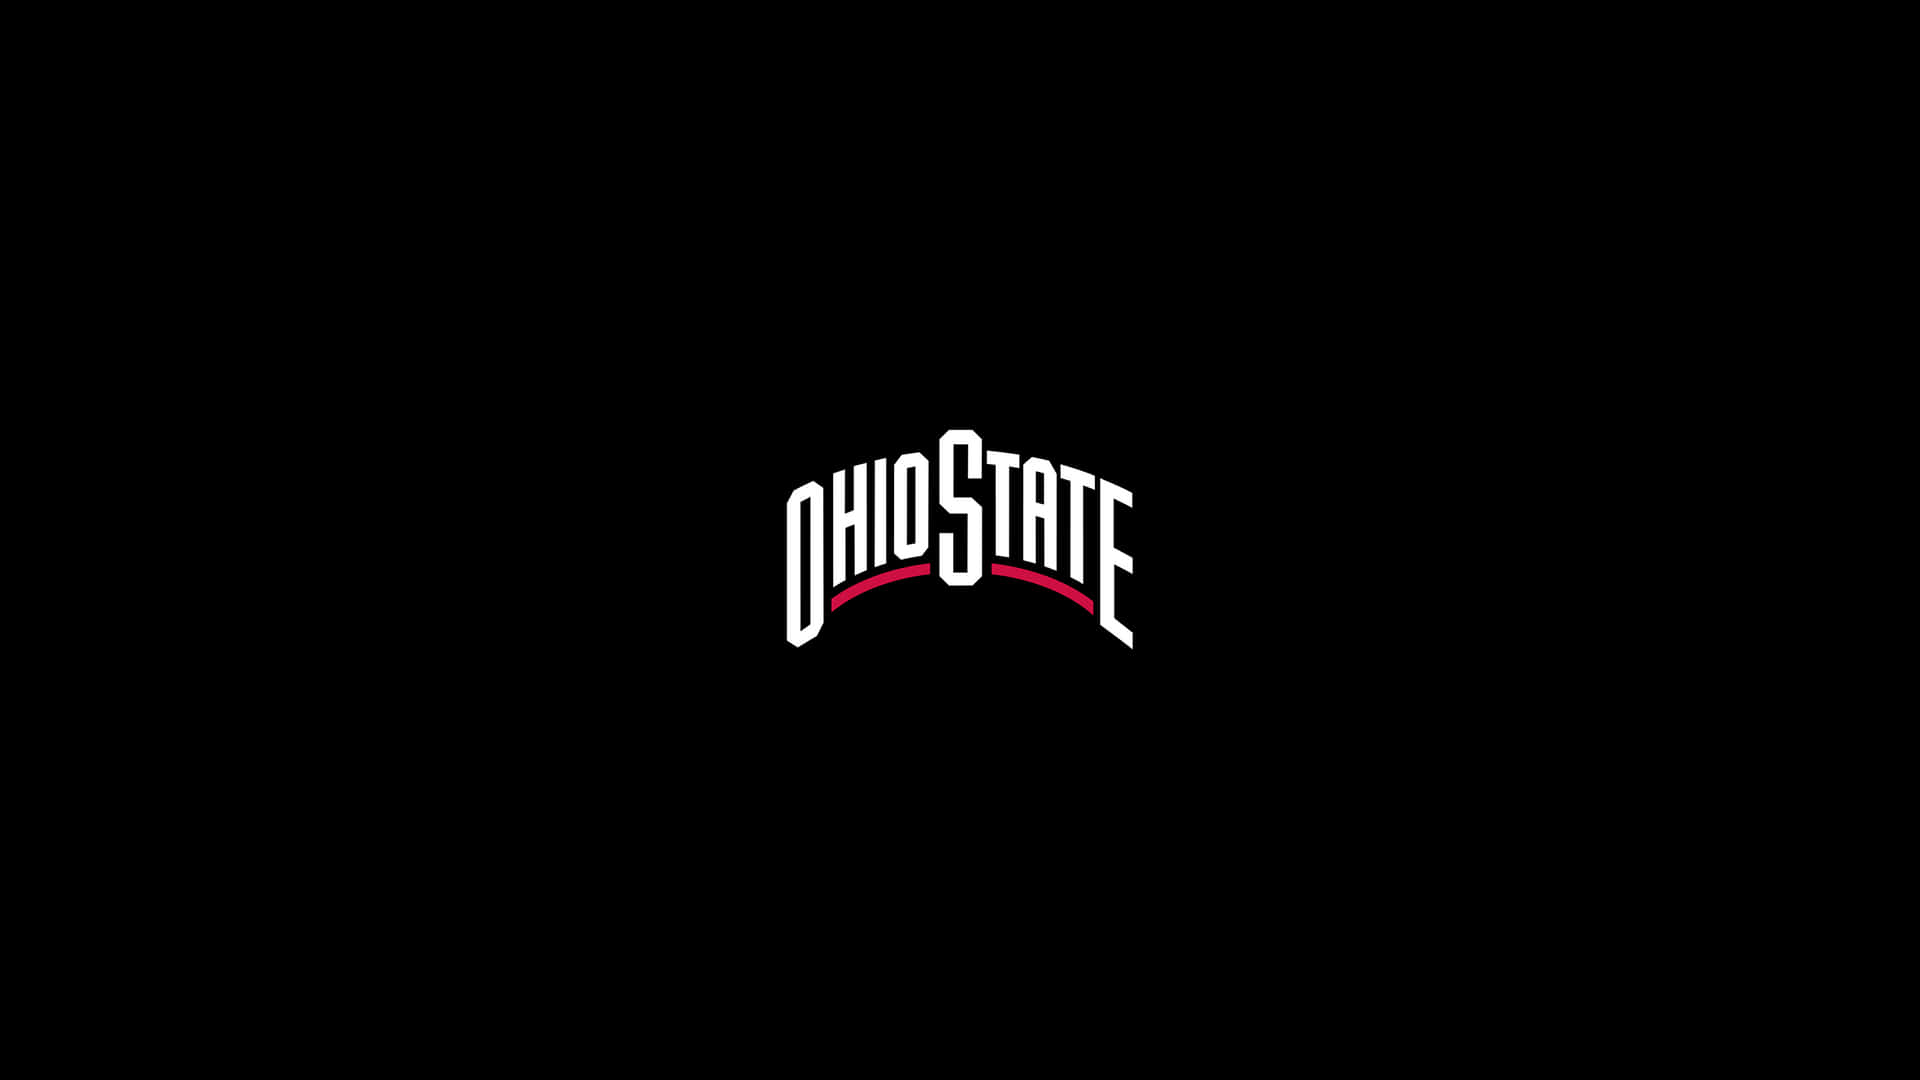 Showing off your awesome 'Cool Ohio State' spirit! Wallpaper